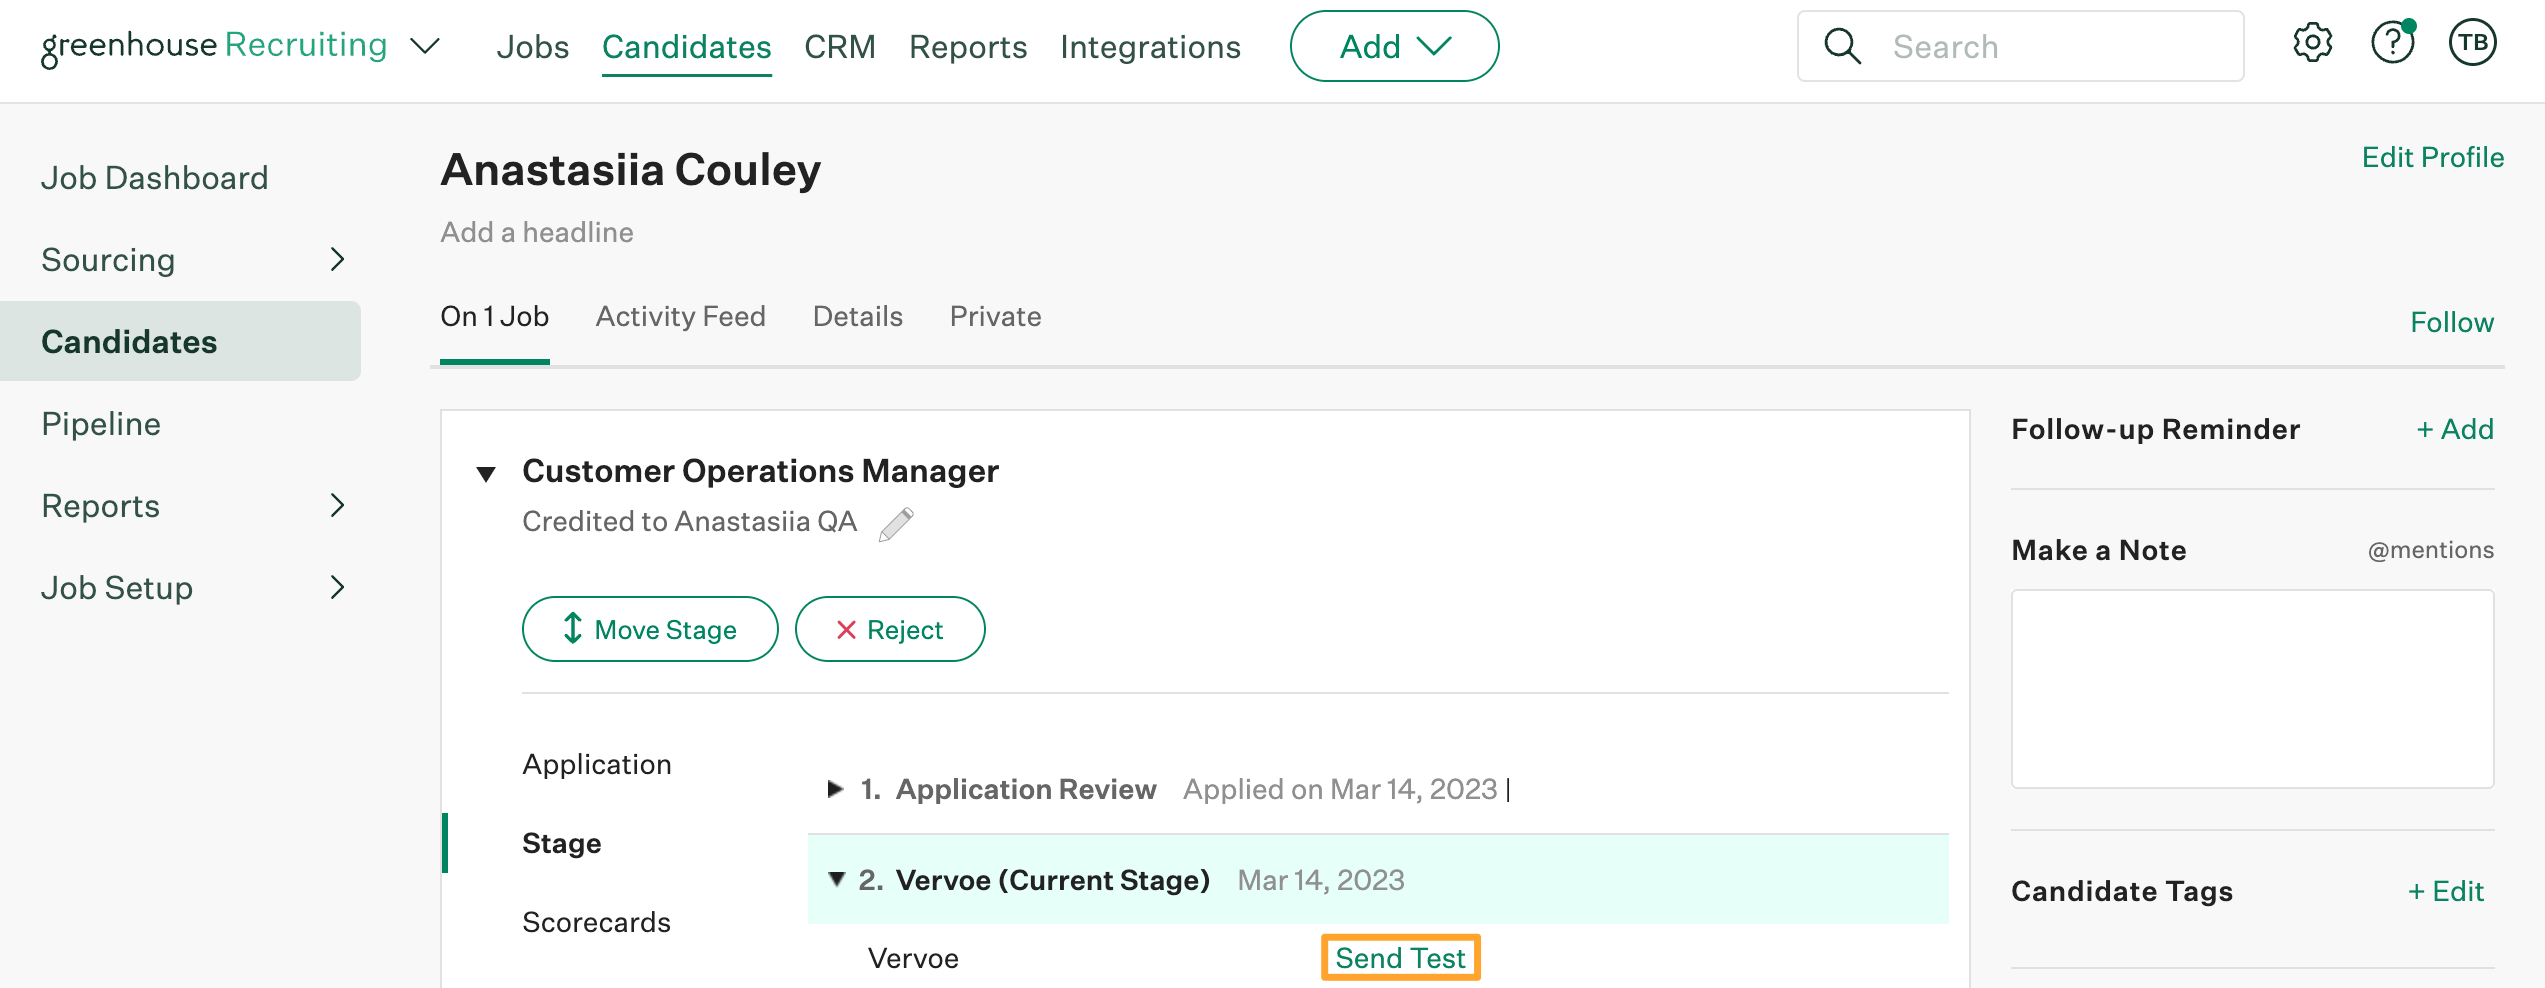 The Vervoe integration shows Send test button highlighted in marigold on a candidate's Vervoe interview stage in Greenhouse Recruiting